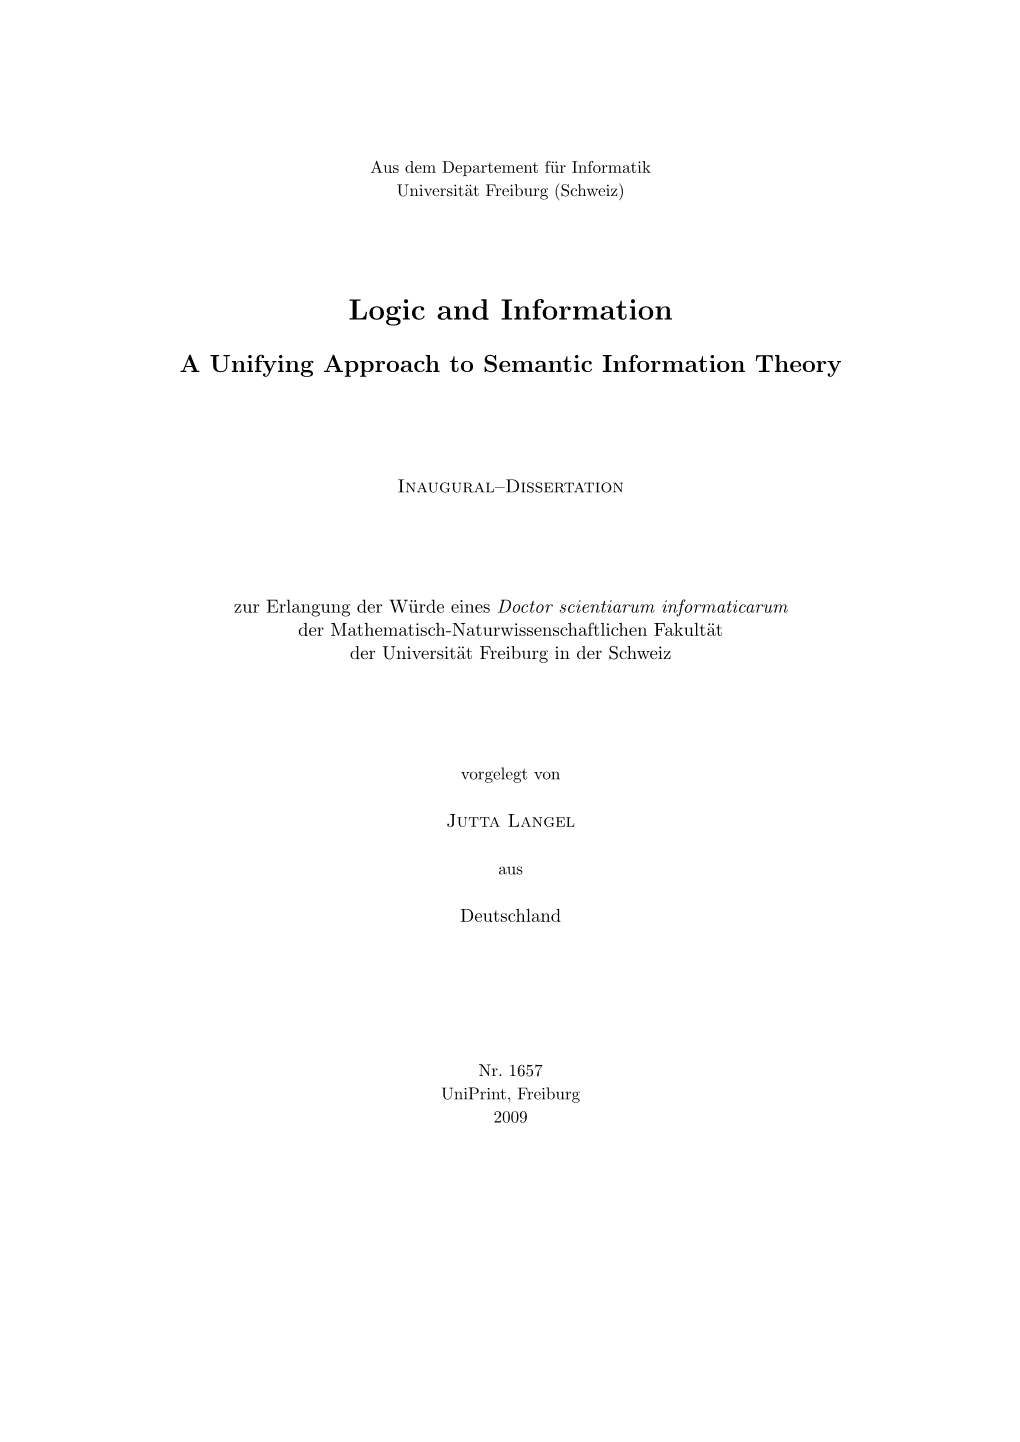 Logic and Information. a Unifying Approach to Semantic Information Theory